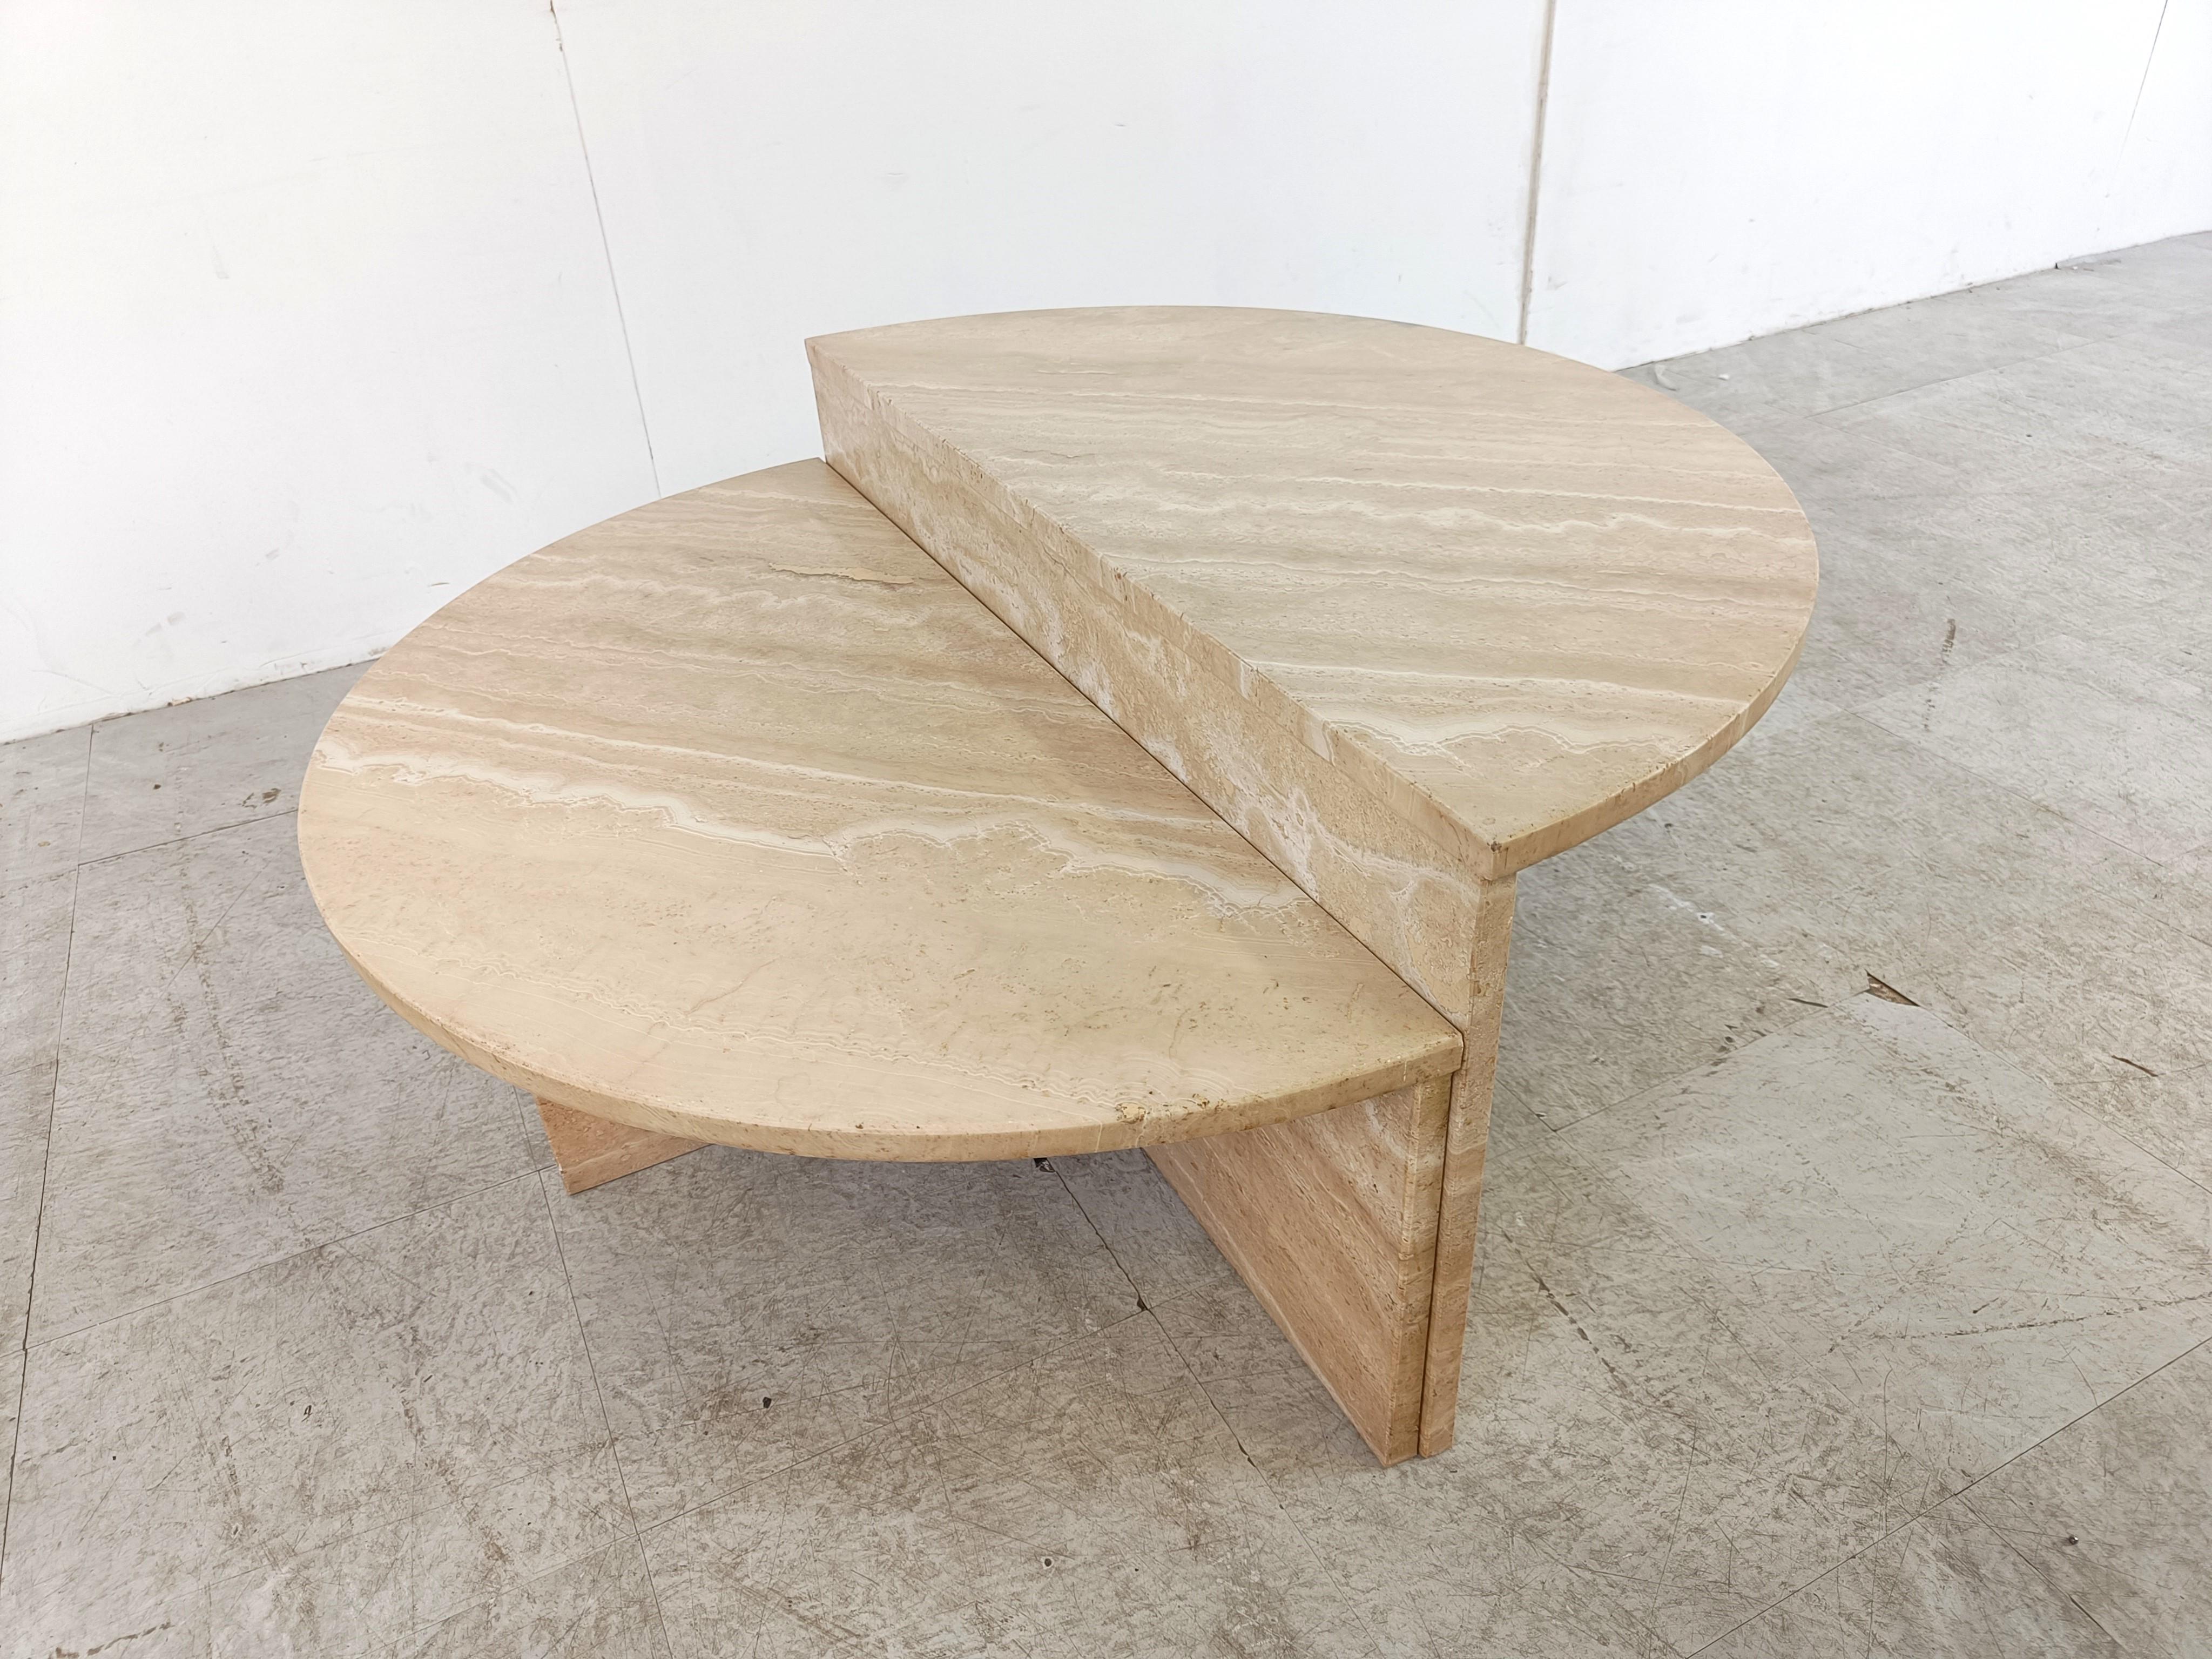 Timeless travertine coffee tables with half round table tops. When put together they form a circle with two levels.

Gorgeous natural vaining in the travertine stone.

Good condition

1970s - Italy

Height tallest table: 40cm/15.74